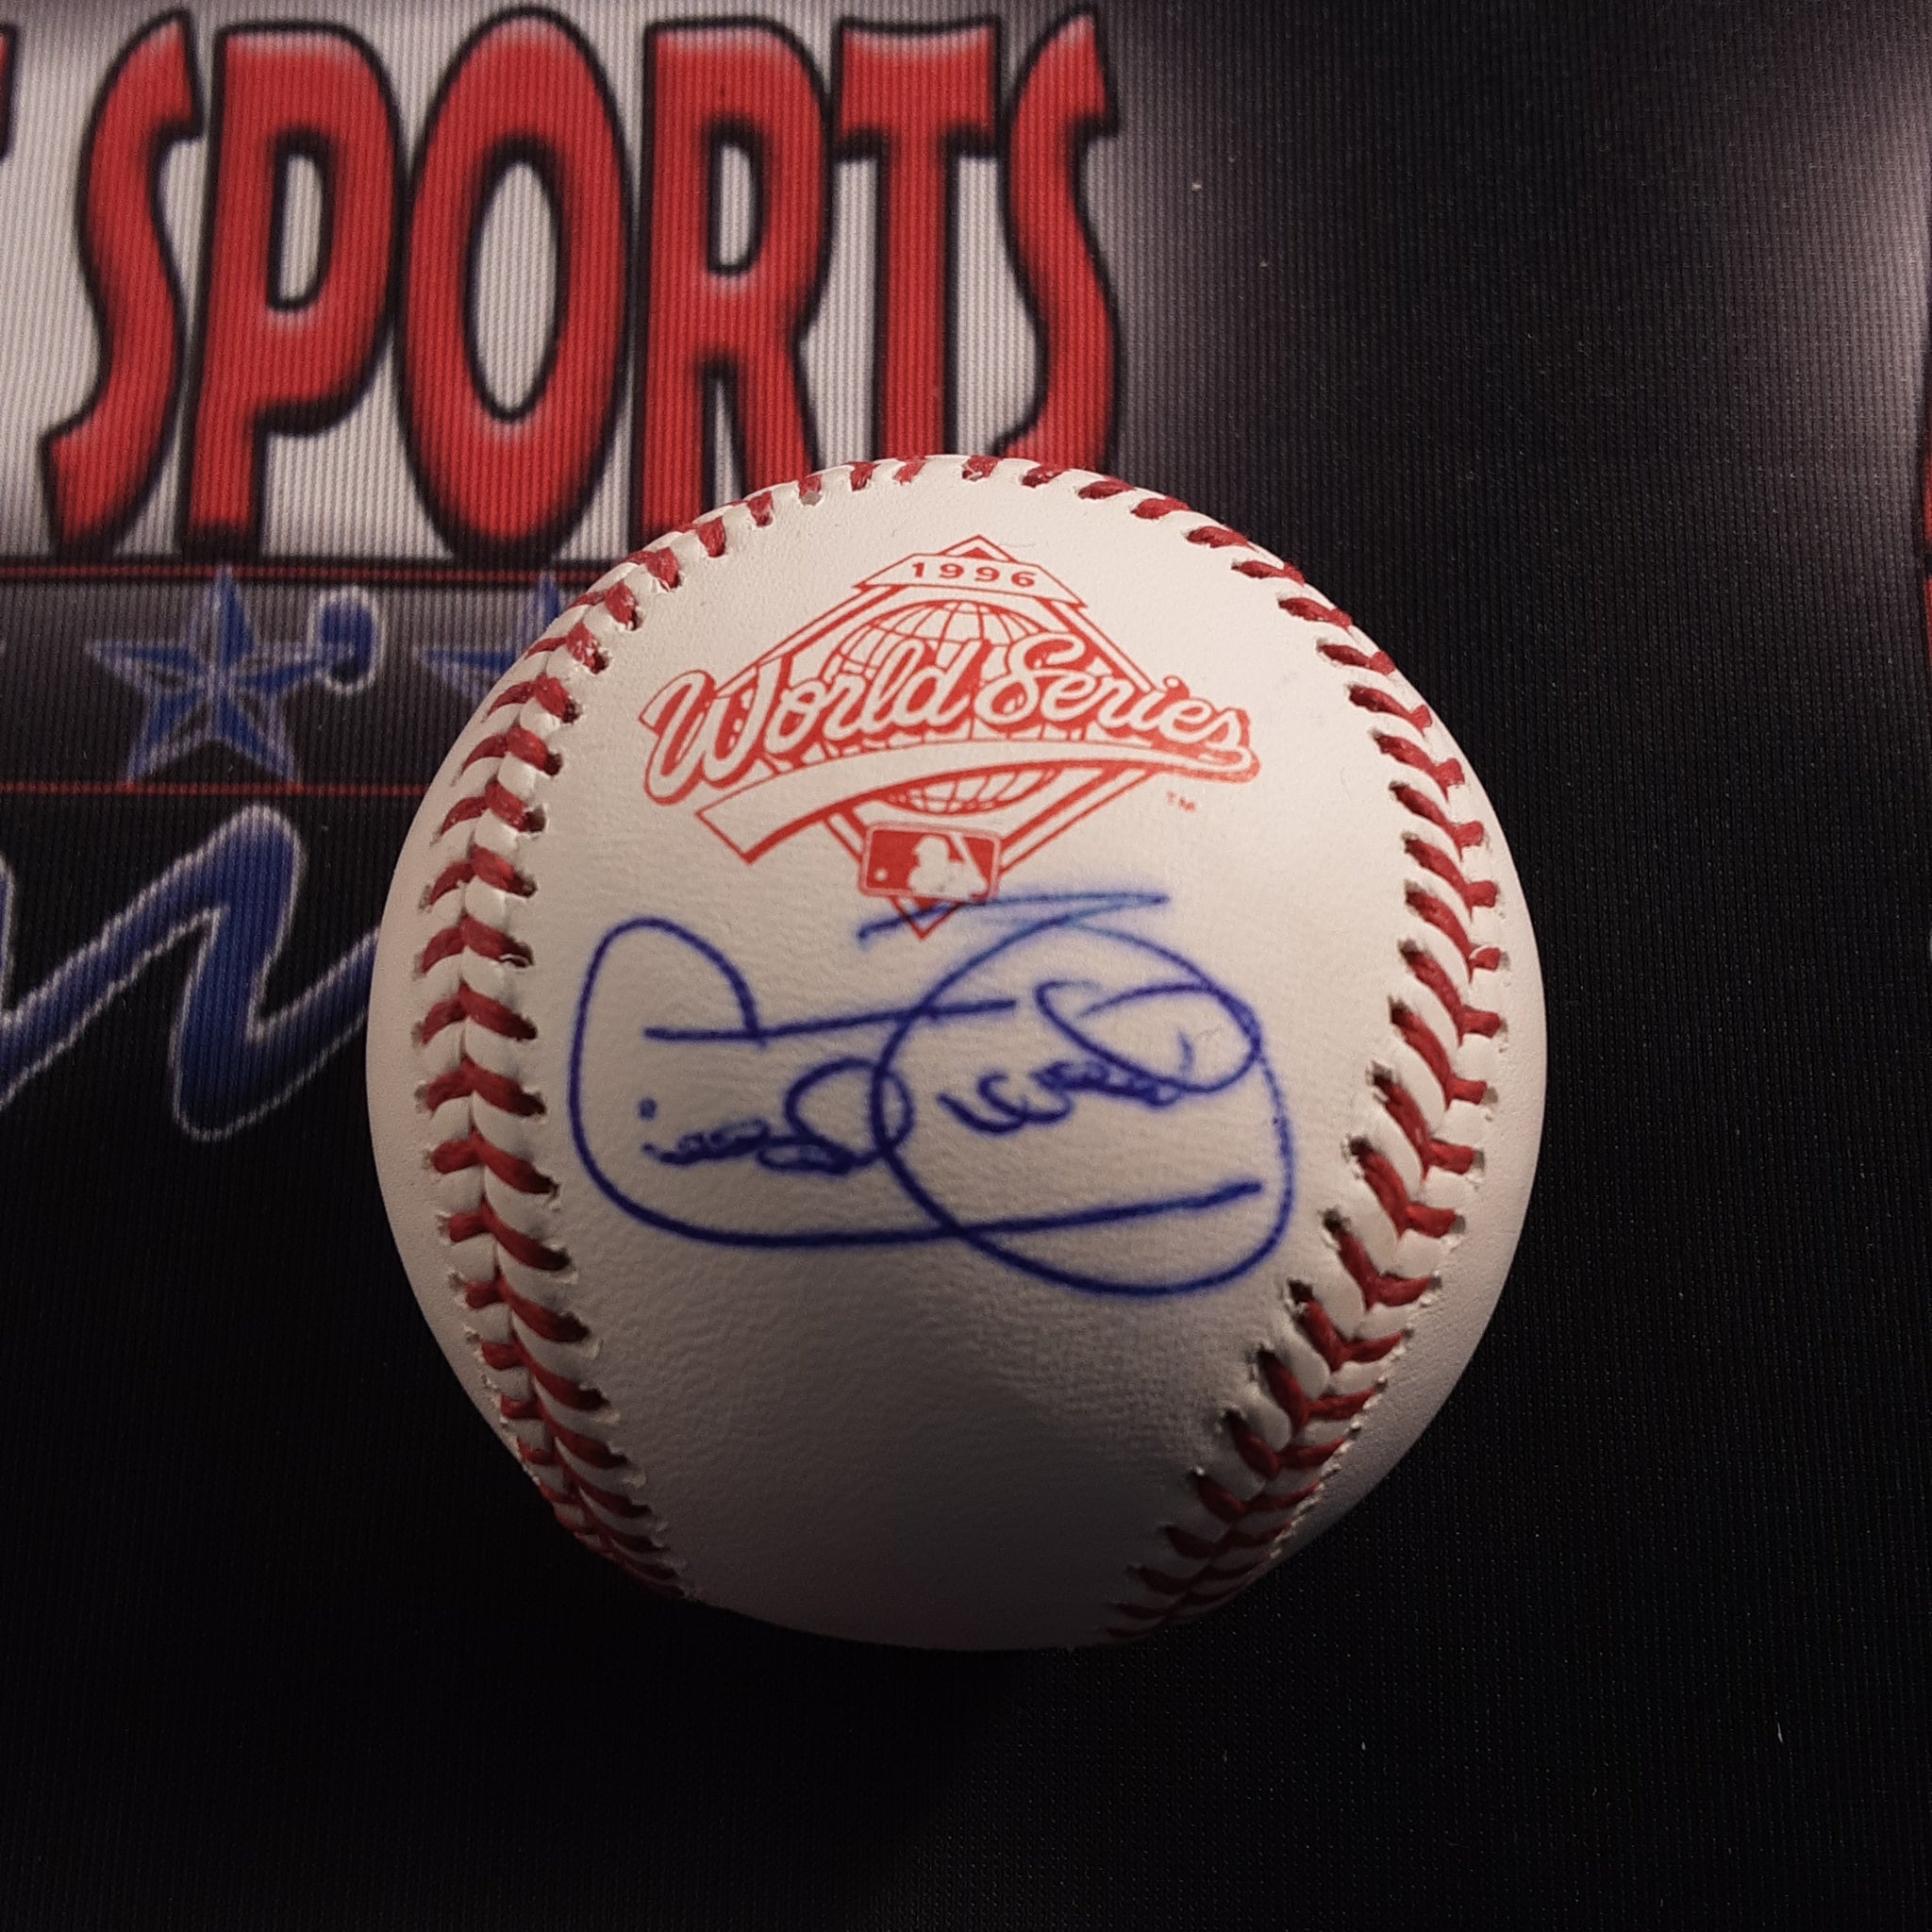 Cecil Fielder Authentic Signed Baseball Autographed JSA.